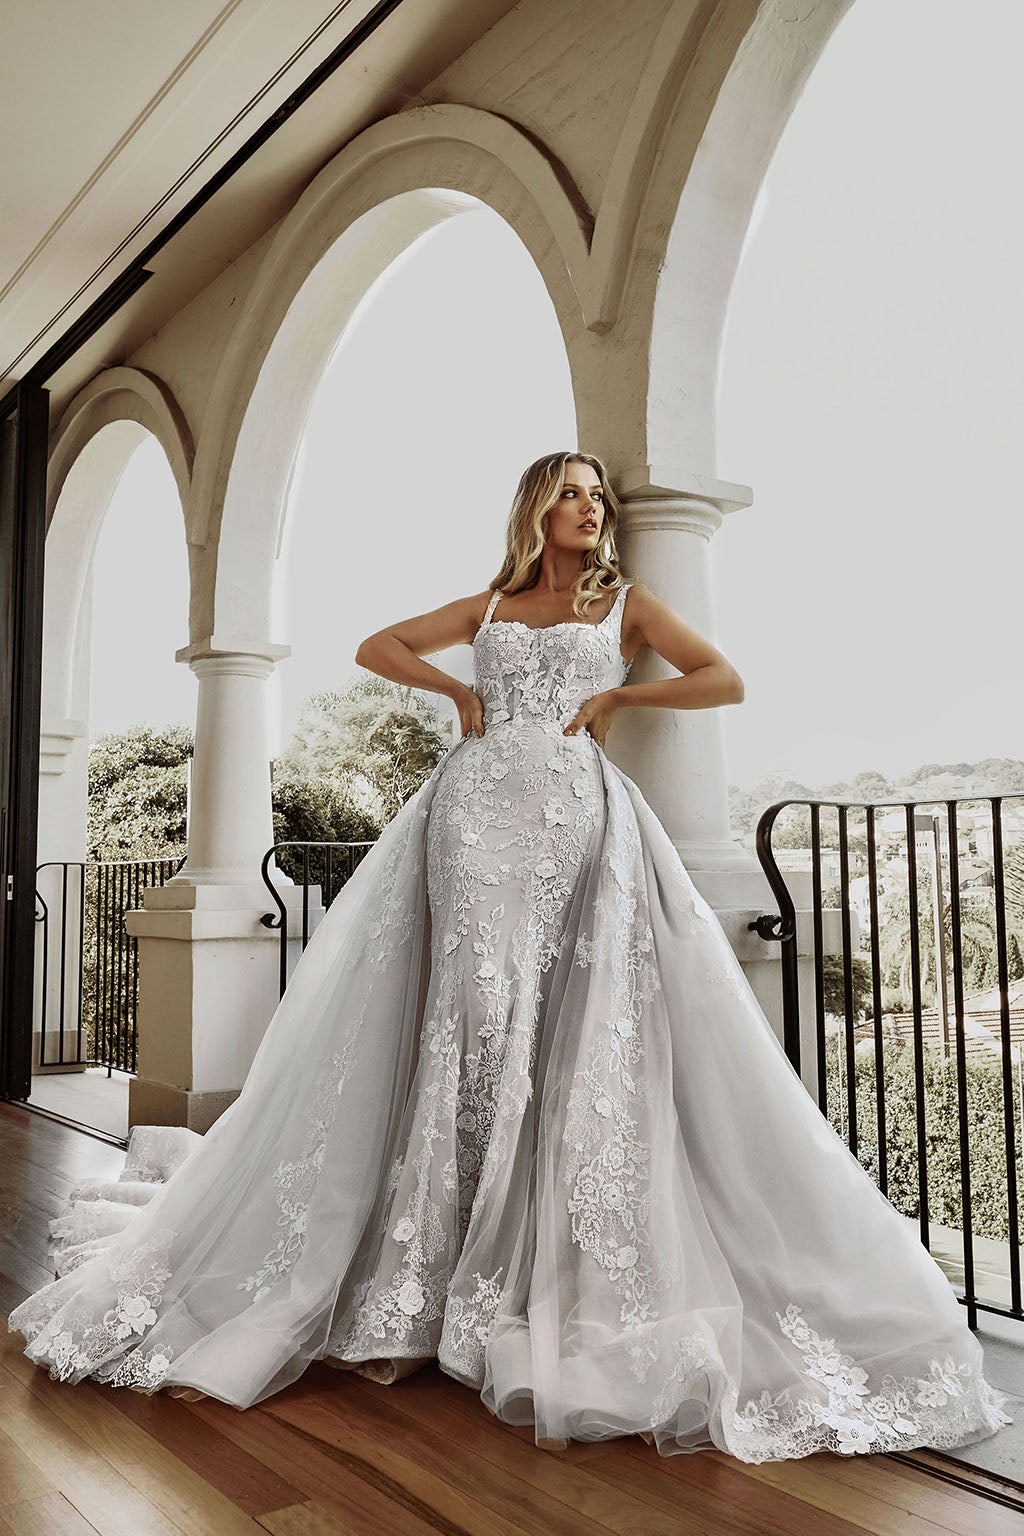 Dramatic Detachable Overskirt by Blanche Bridal - Image 1